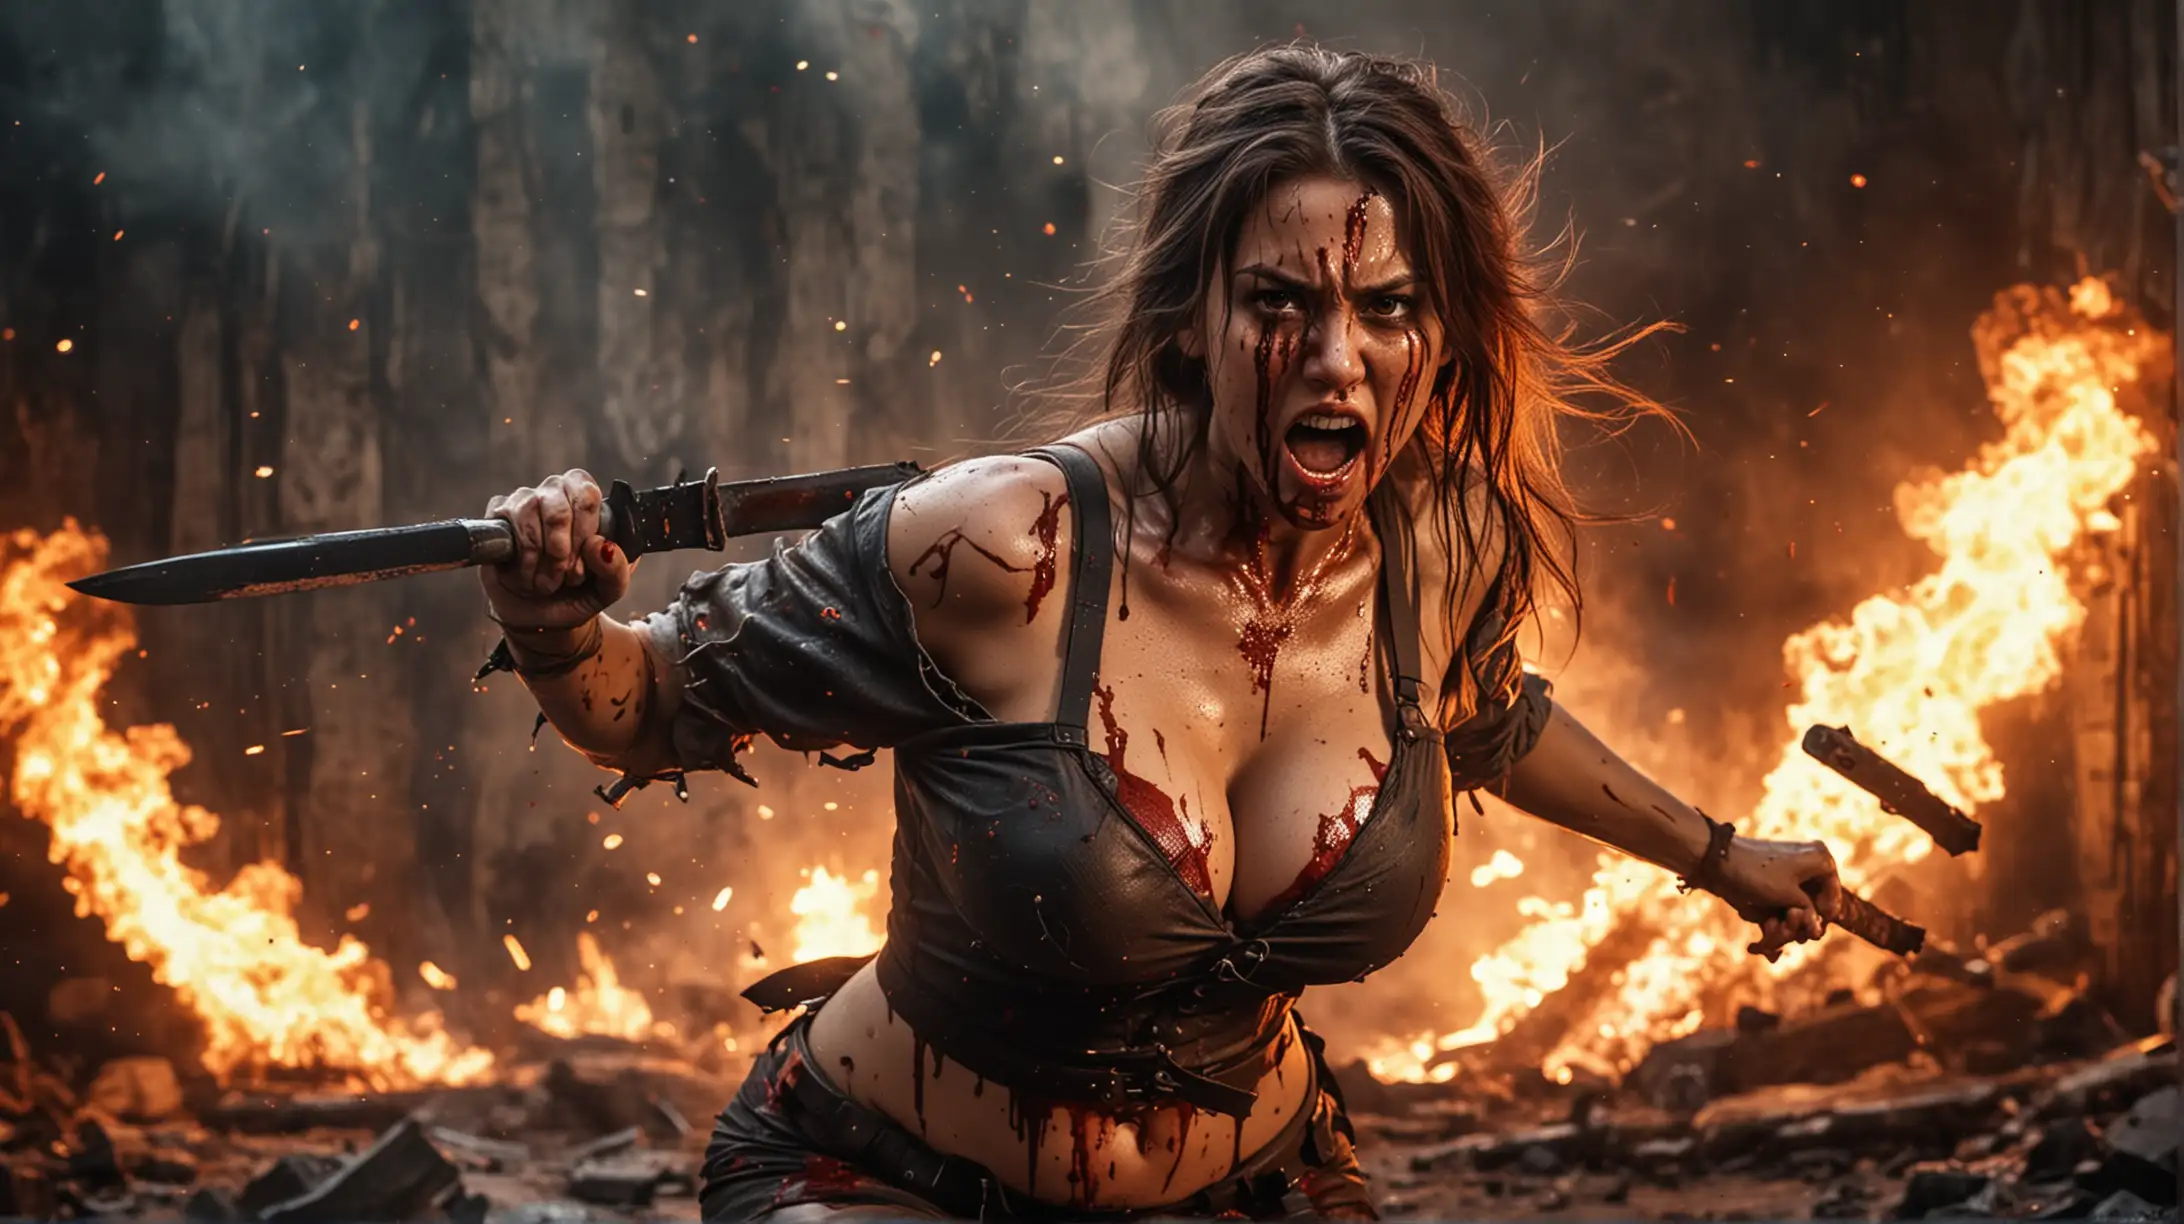 Sexy big tits bloody woman Expression on the face when she swings her blade. 

Battle war background with fire and explosion 